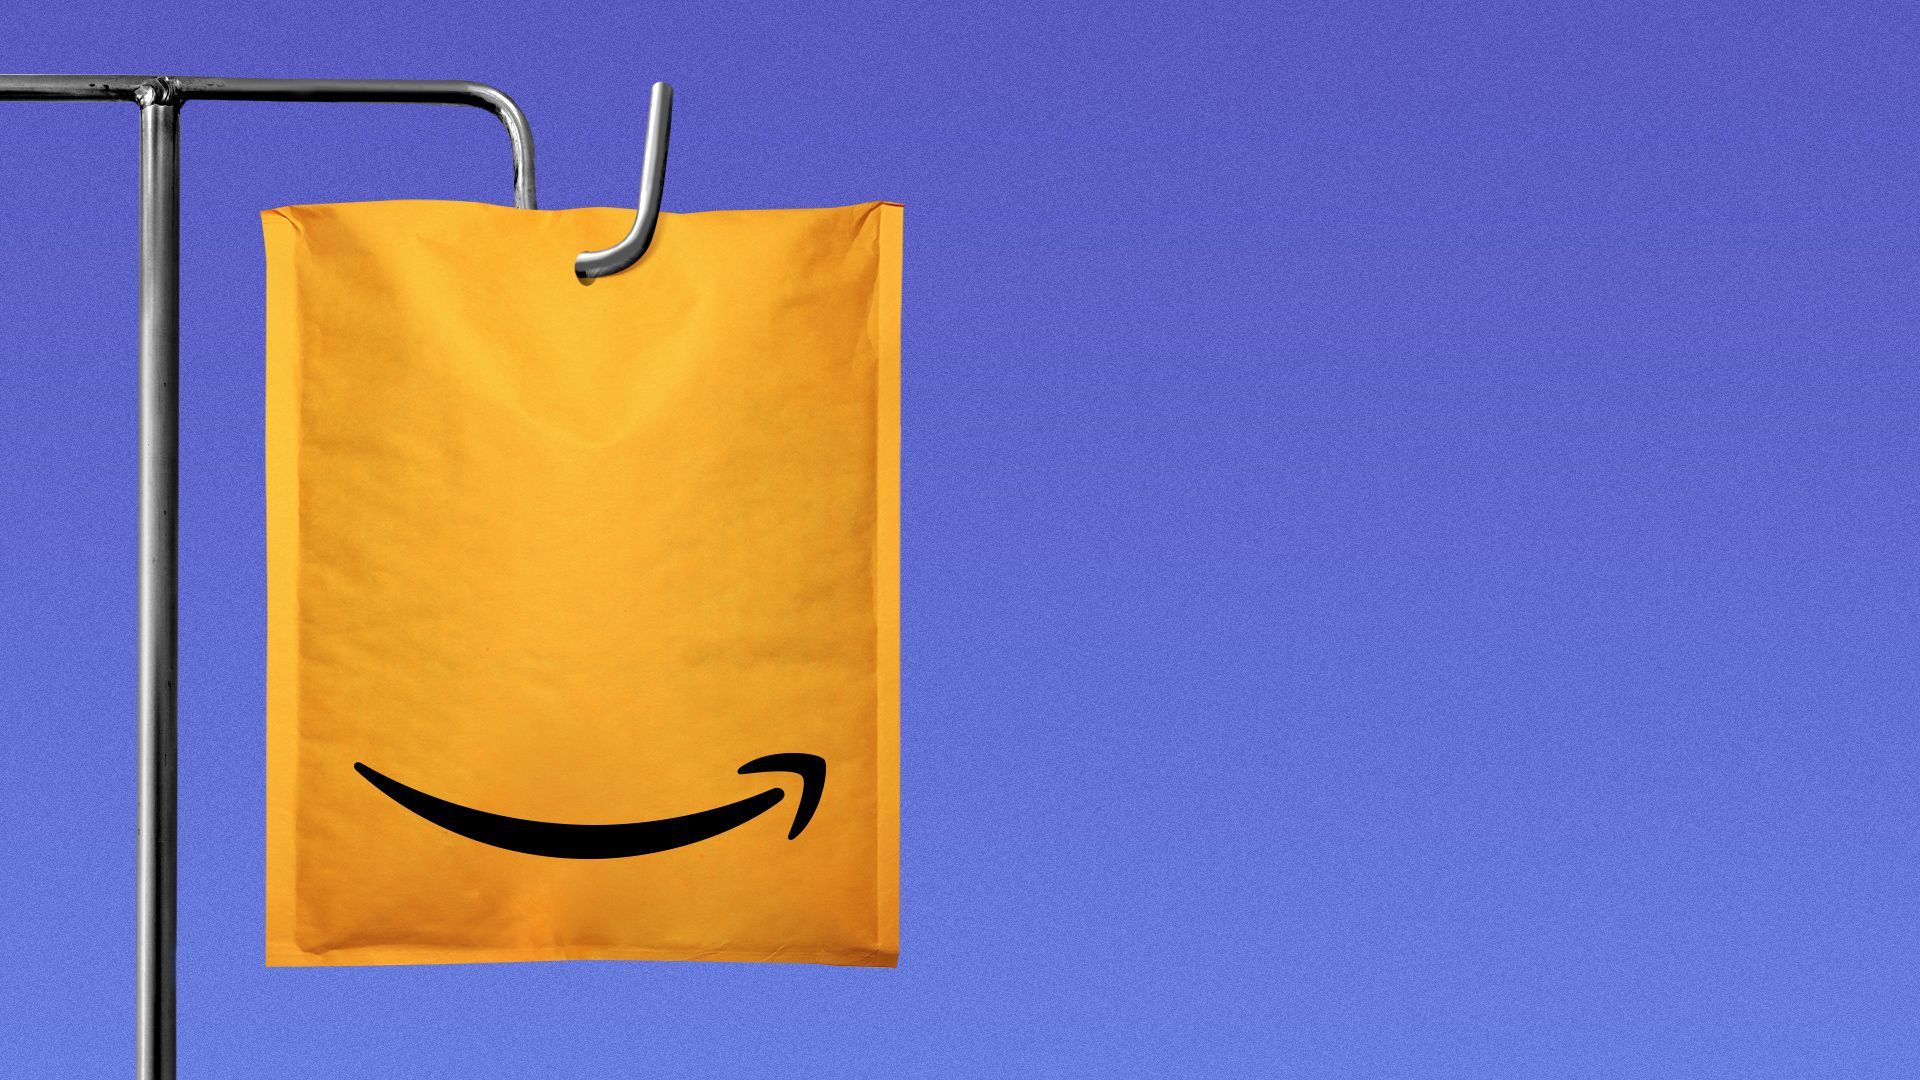 Illustration of an Amazon envelope hanging from a saline hook.